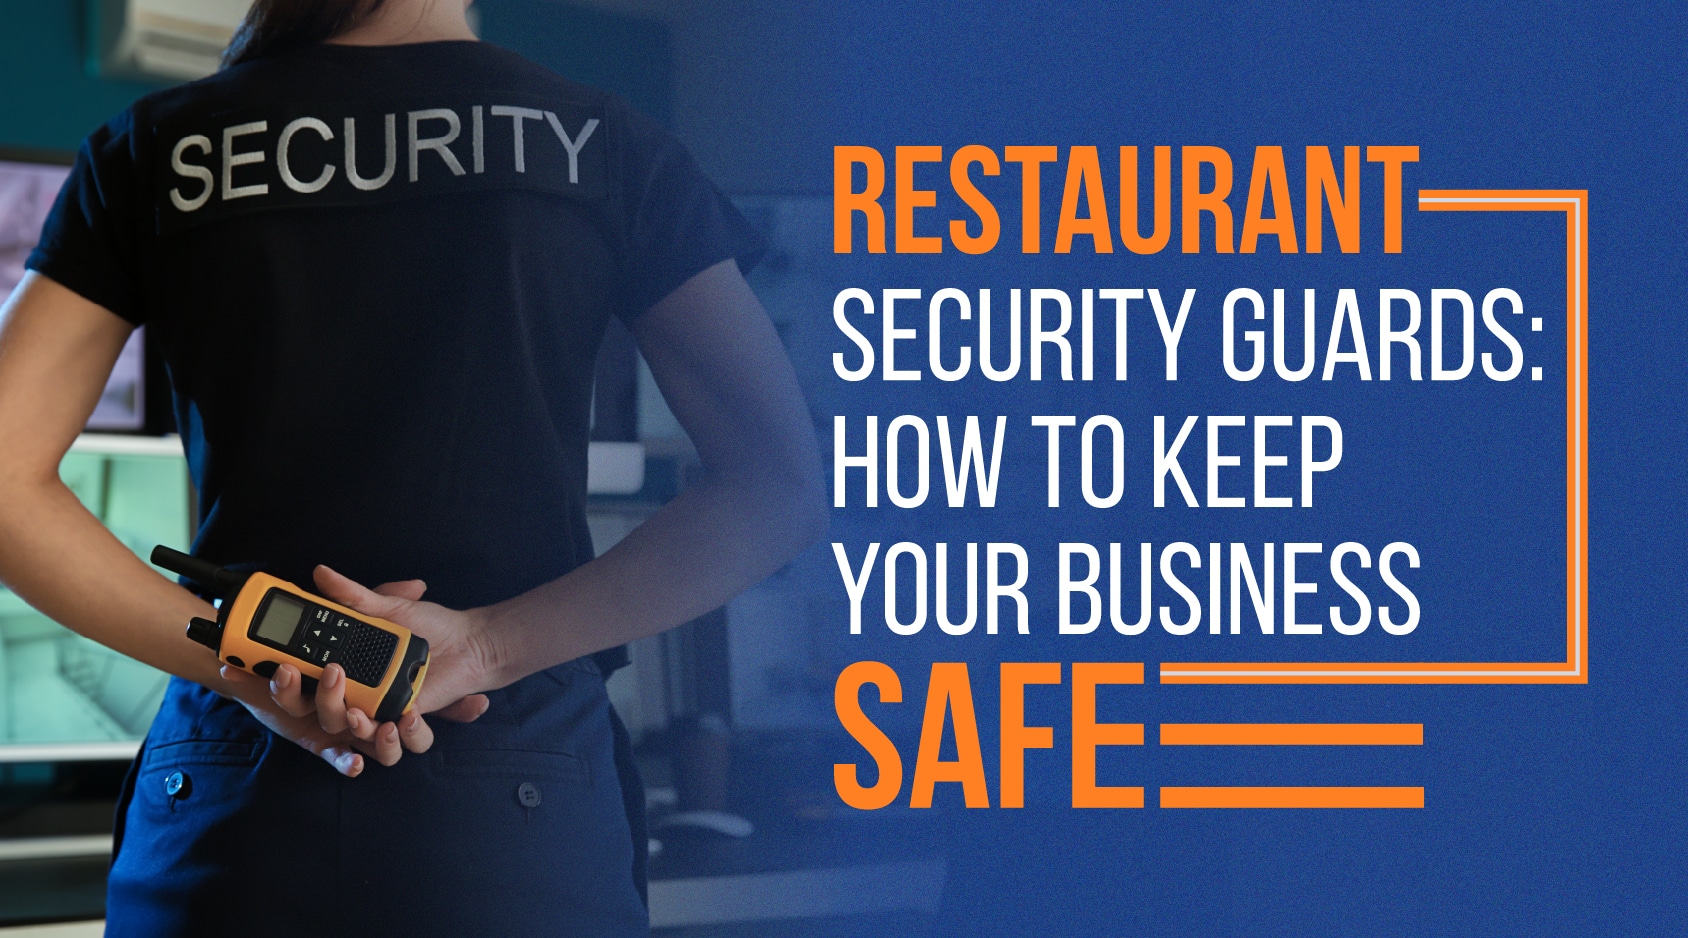 Restaurant security guards How to keep your business safe